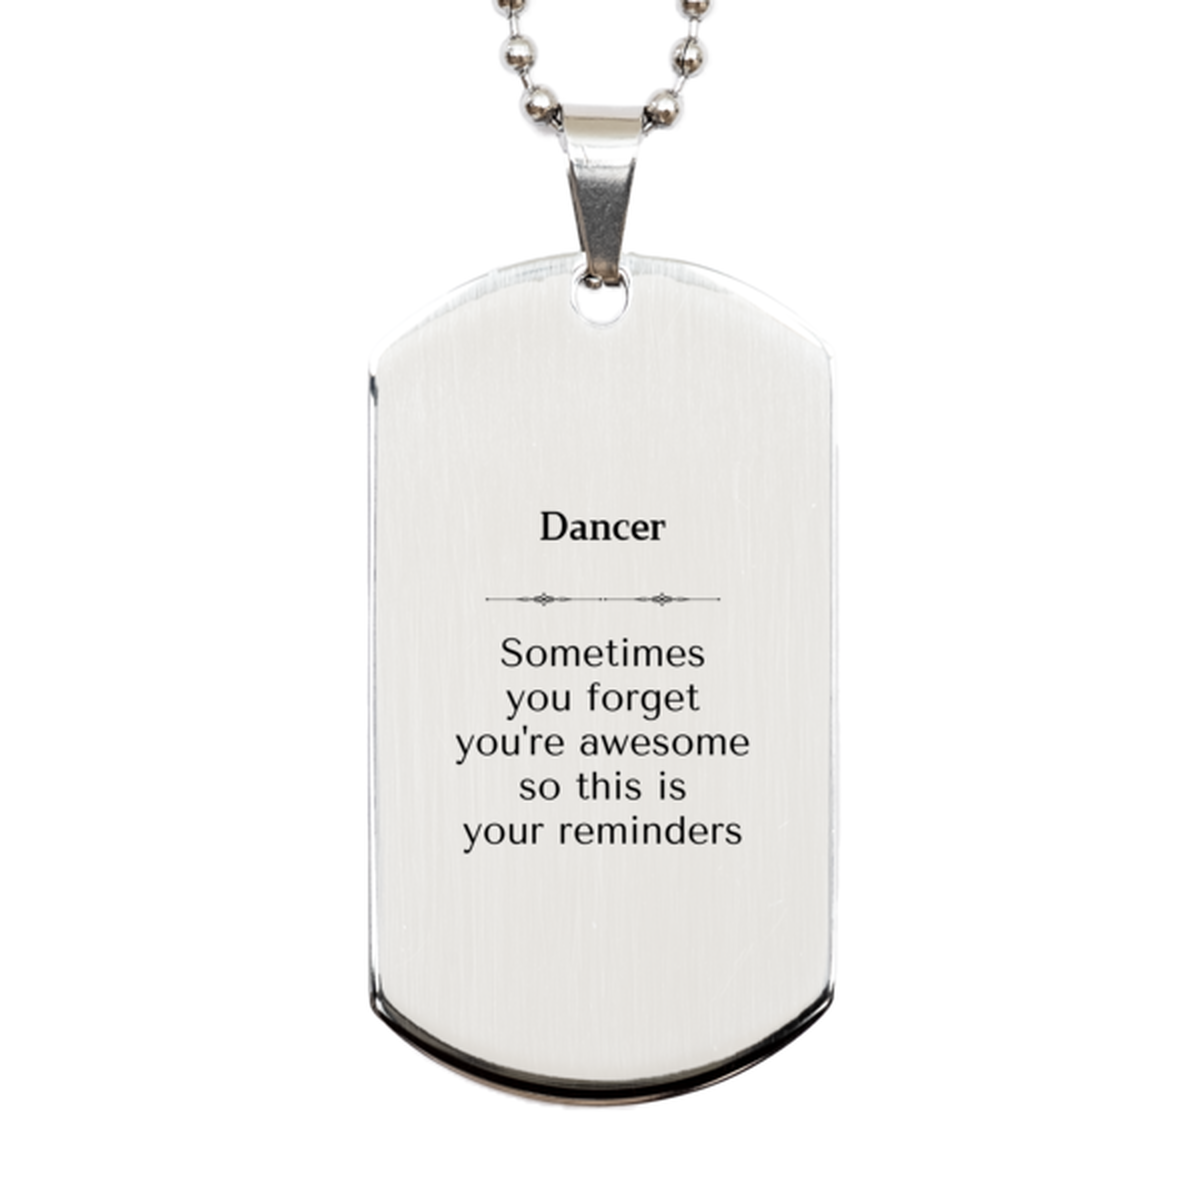 Sentimental Dancer Silver Dog Tag, Dancer Sometimes you forget you're awesome so this is your reminders, Graduation Christmas Birthday Gifts for Dancer, Men, Women, Coworkers